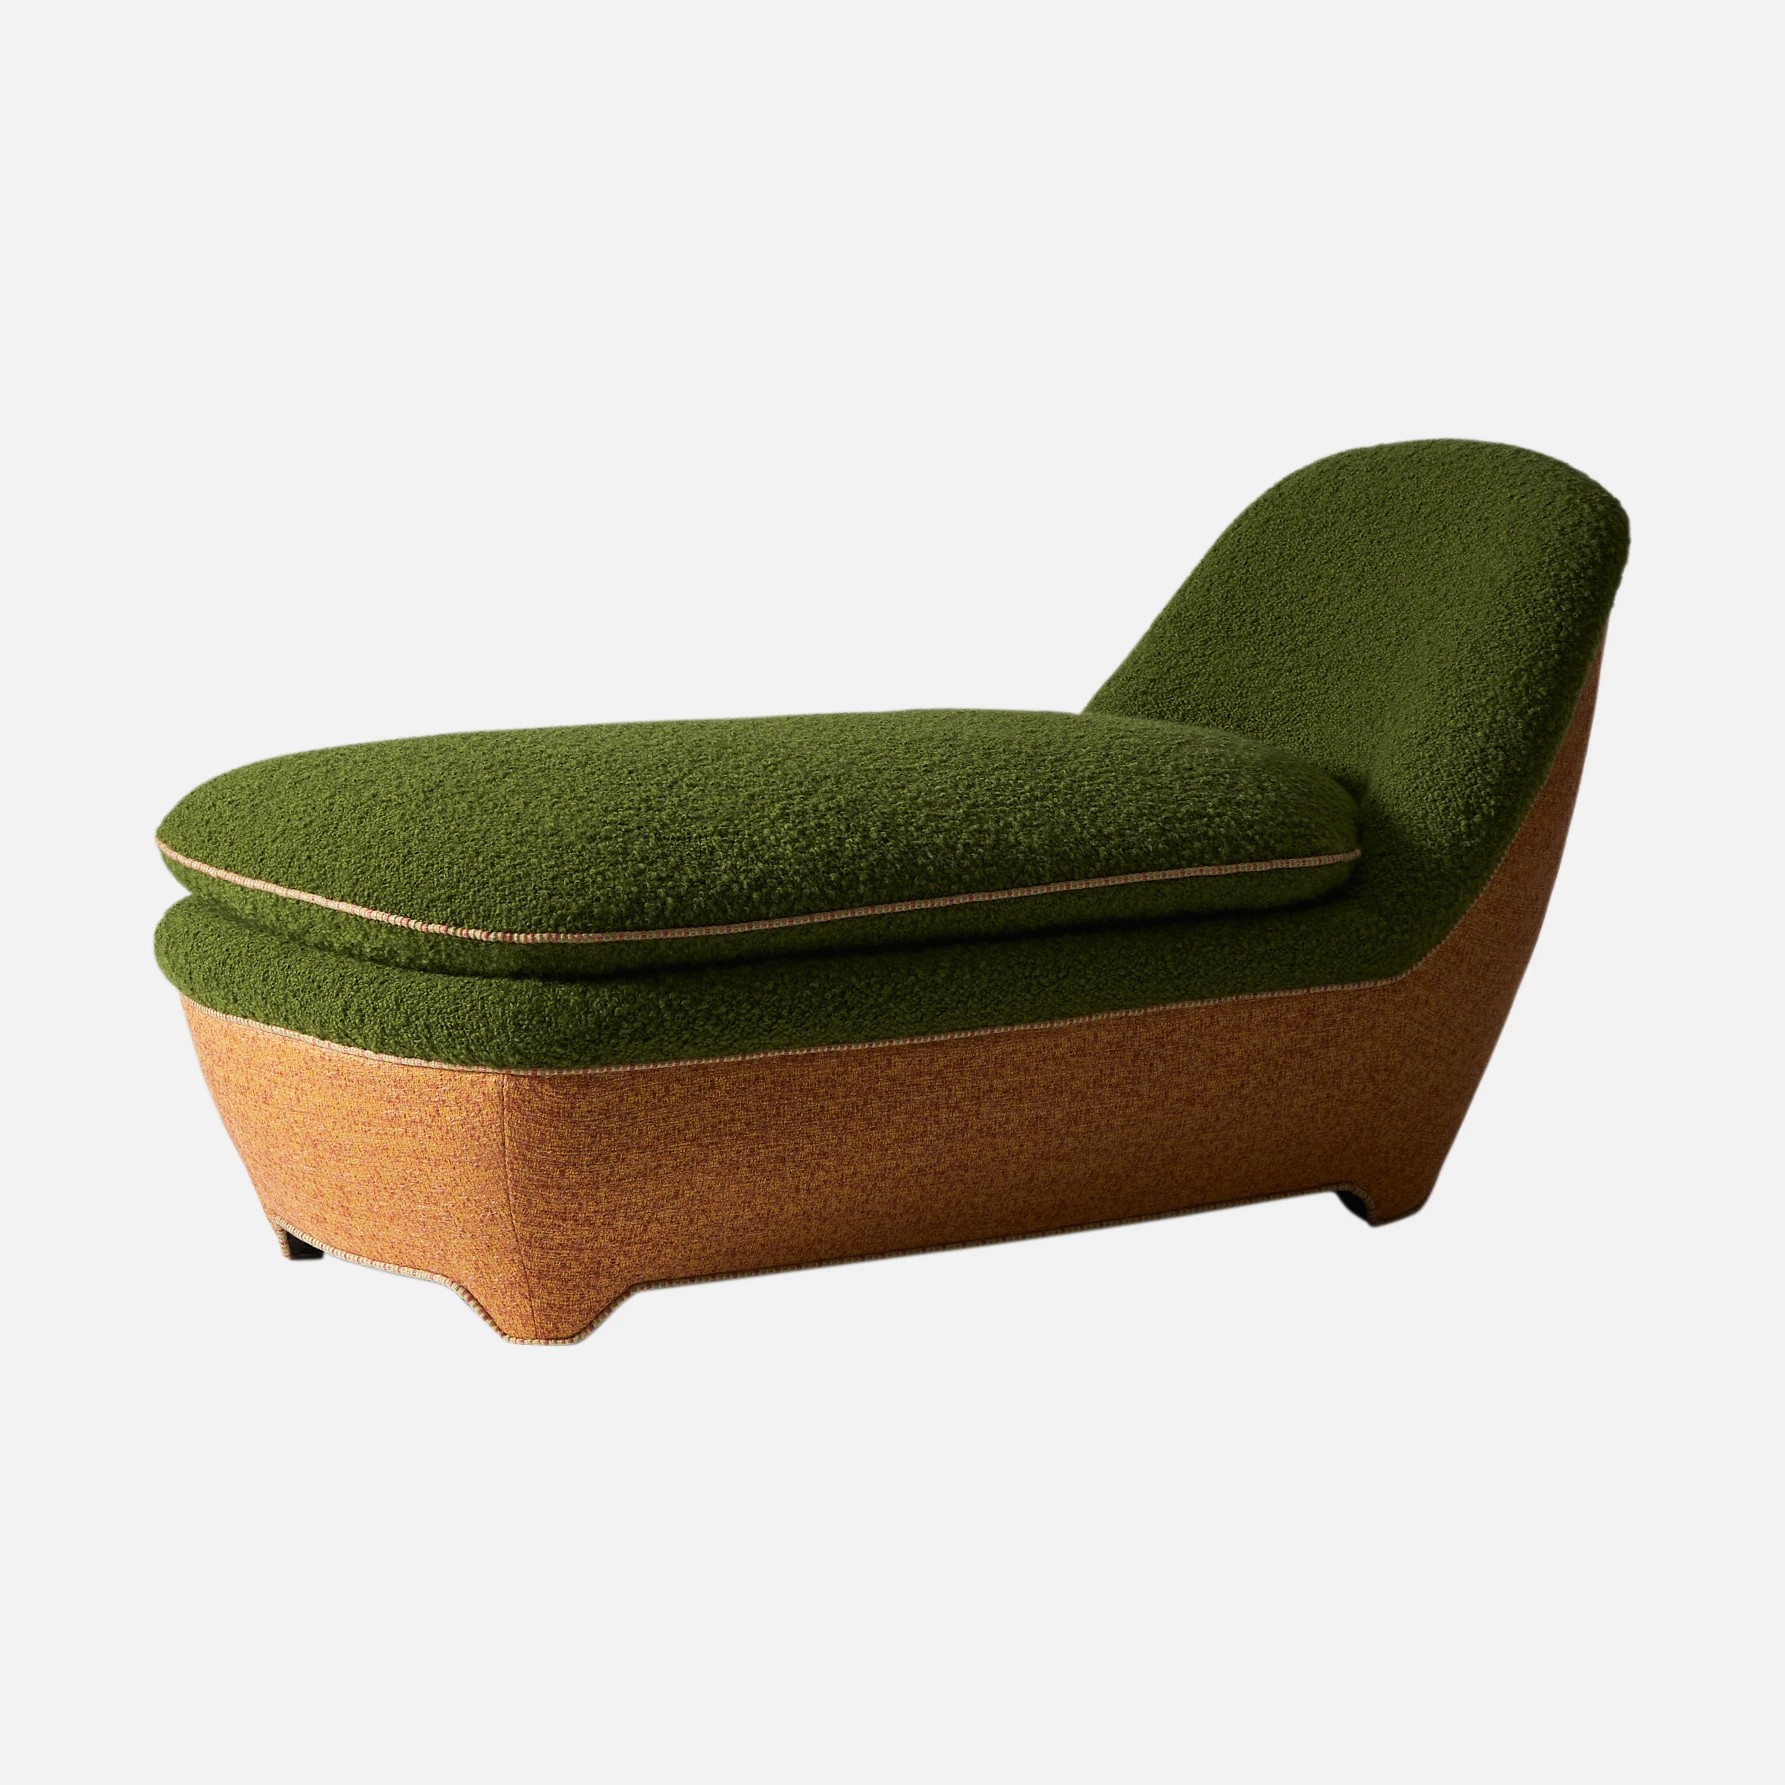 The image of an Candover Daybed product